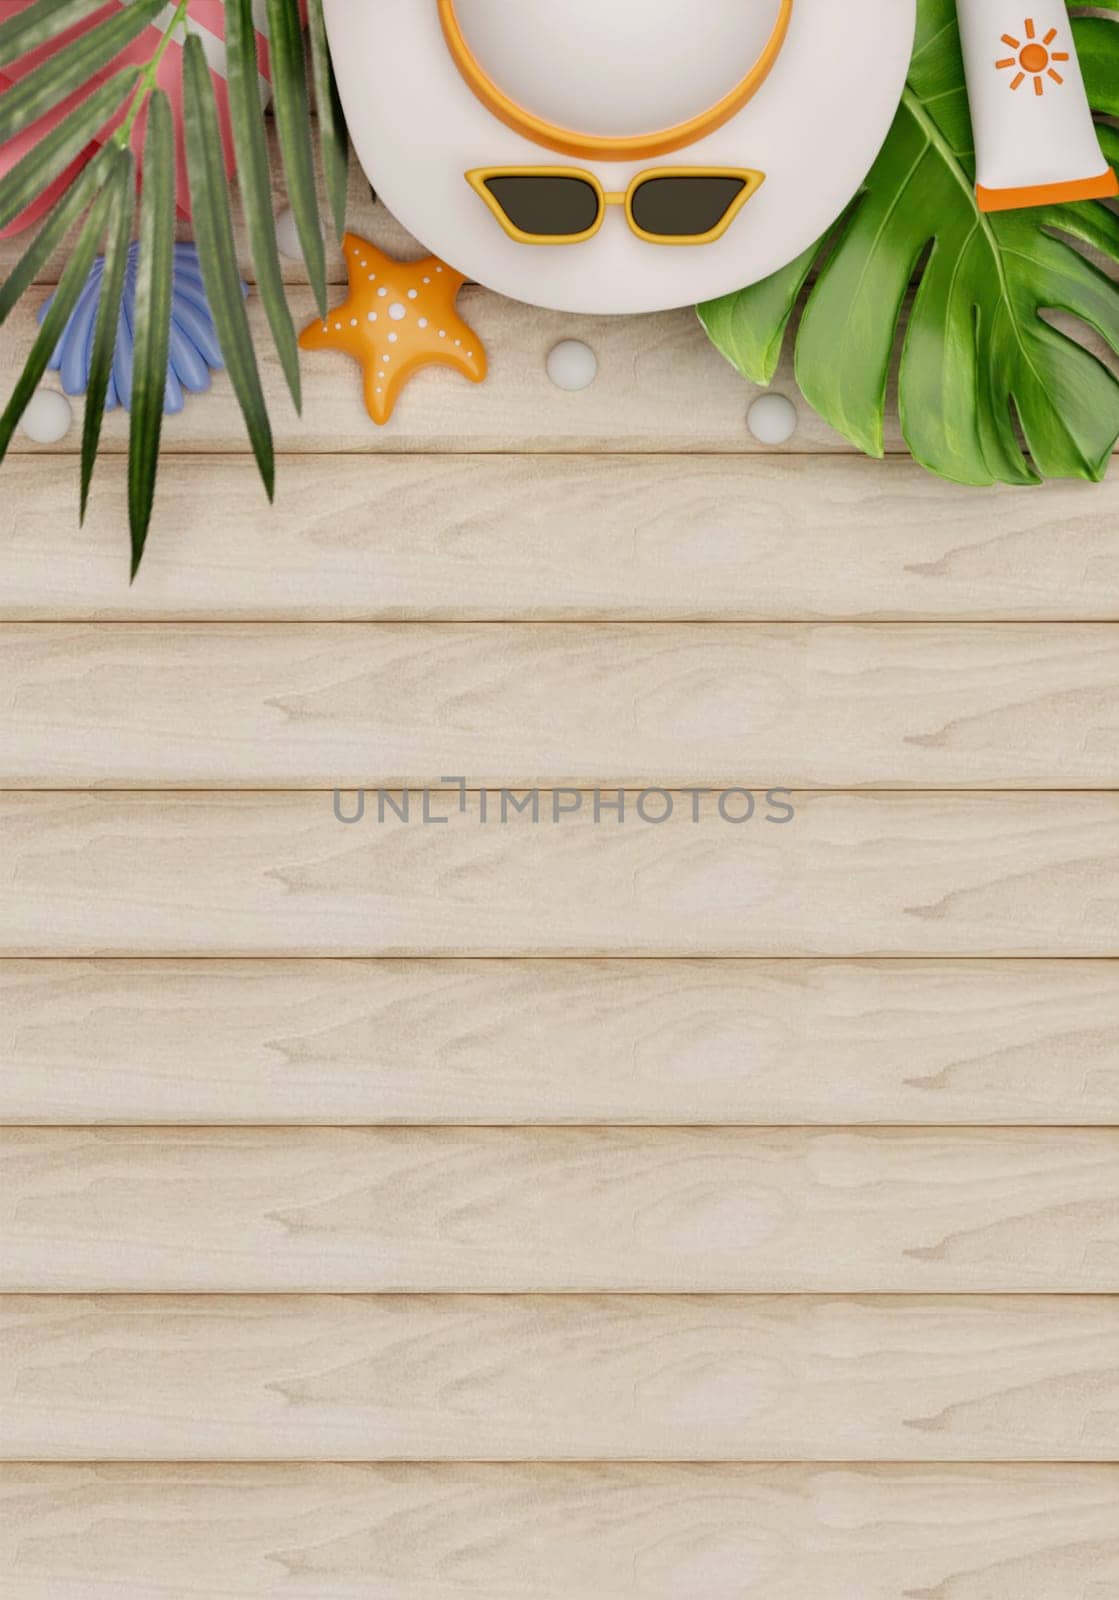 Swimming pool with pineapple in swimming ring, . Summer vacation vibes. Creative summer concept idea. 3d rendering illustration. by meepiangraphic